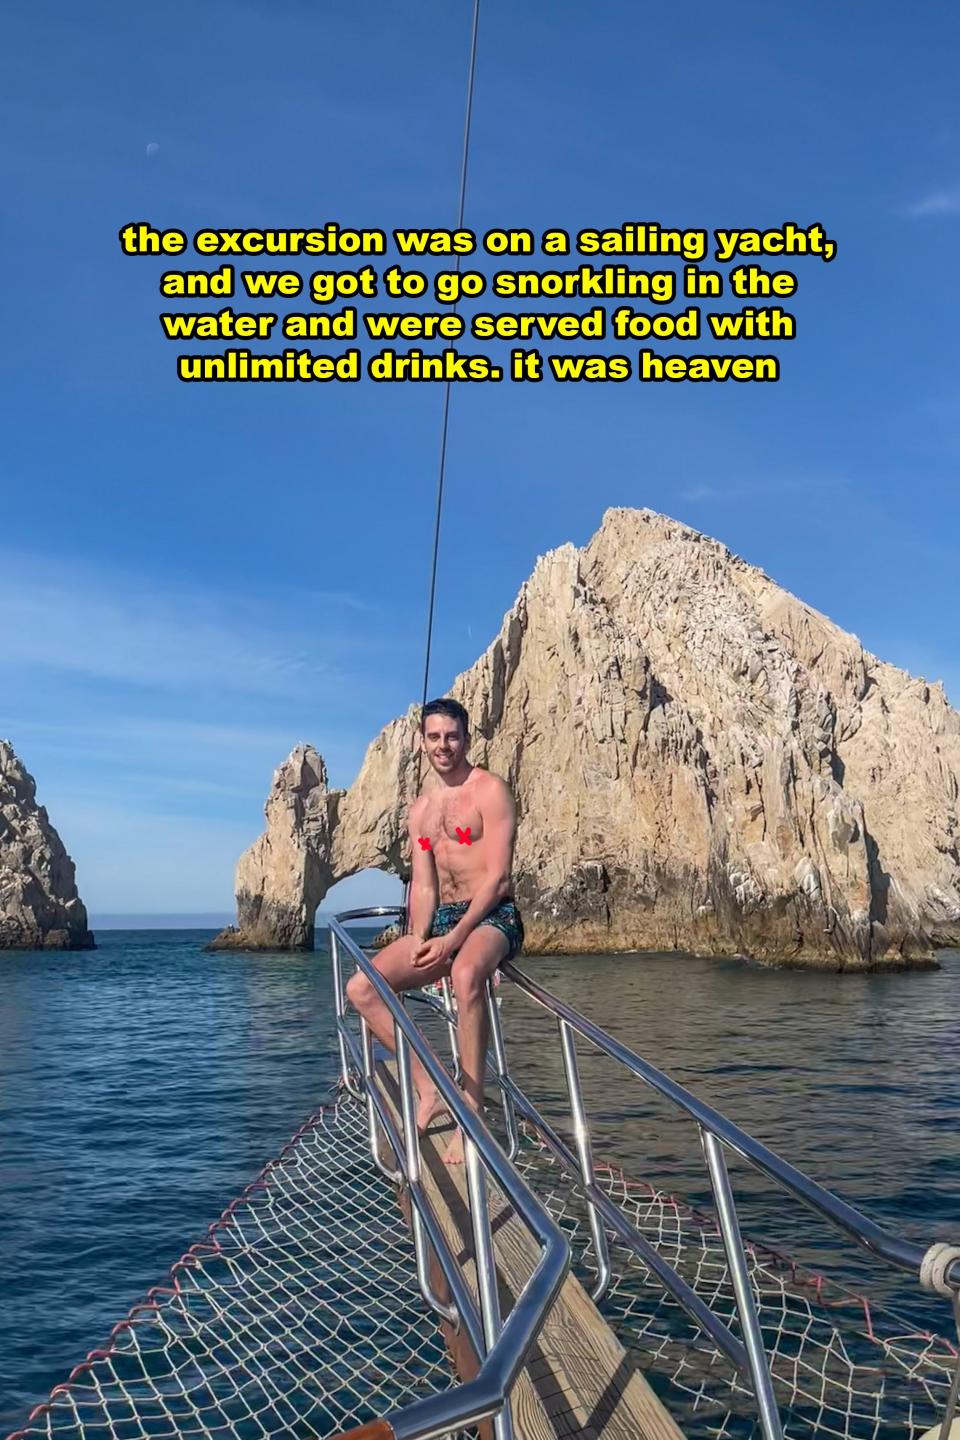 Person sitting on a yacht's bow with rocky formations in the background. Text recounts enjoyable sailing and snorkeling experience